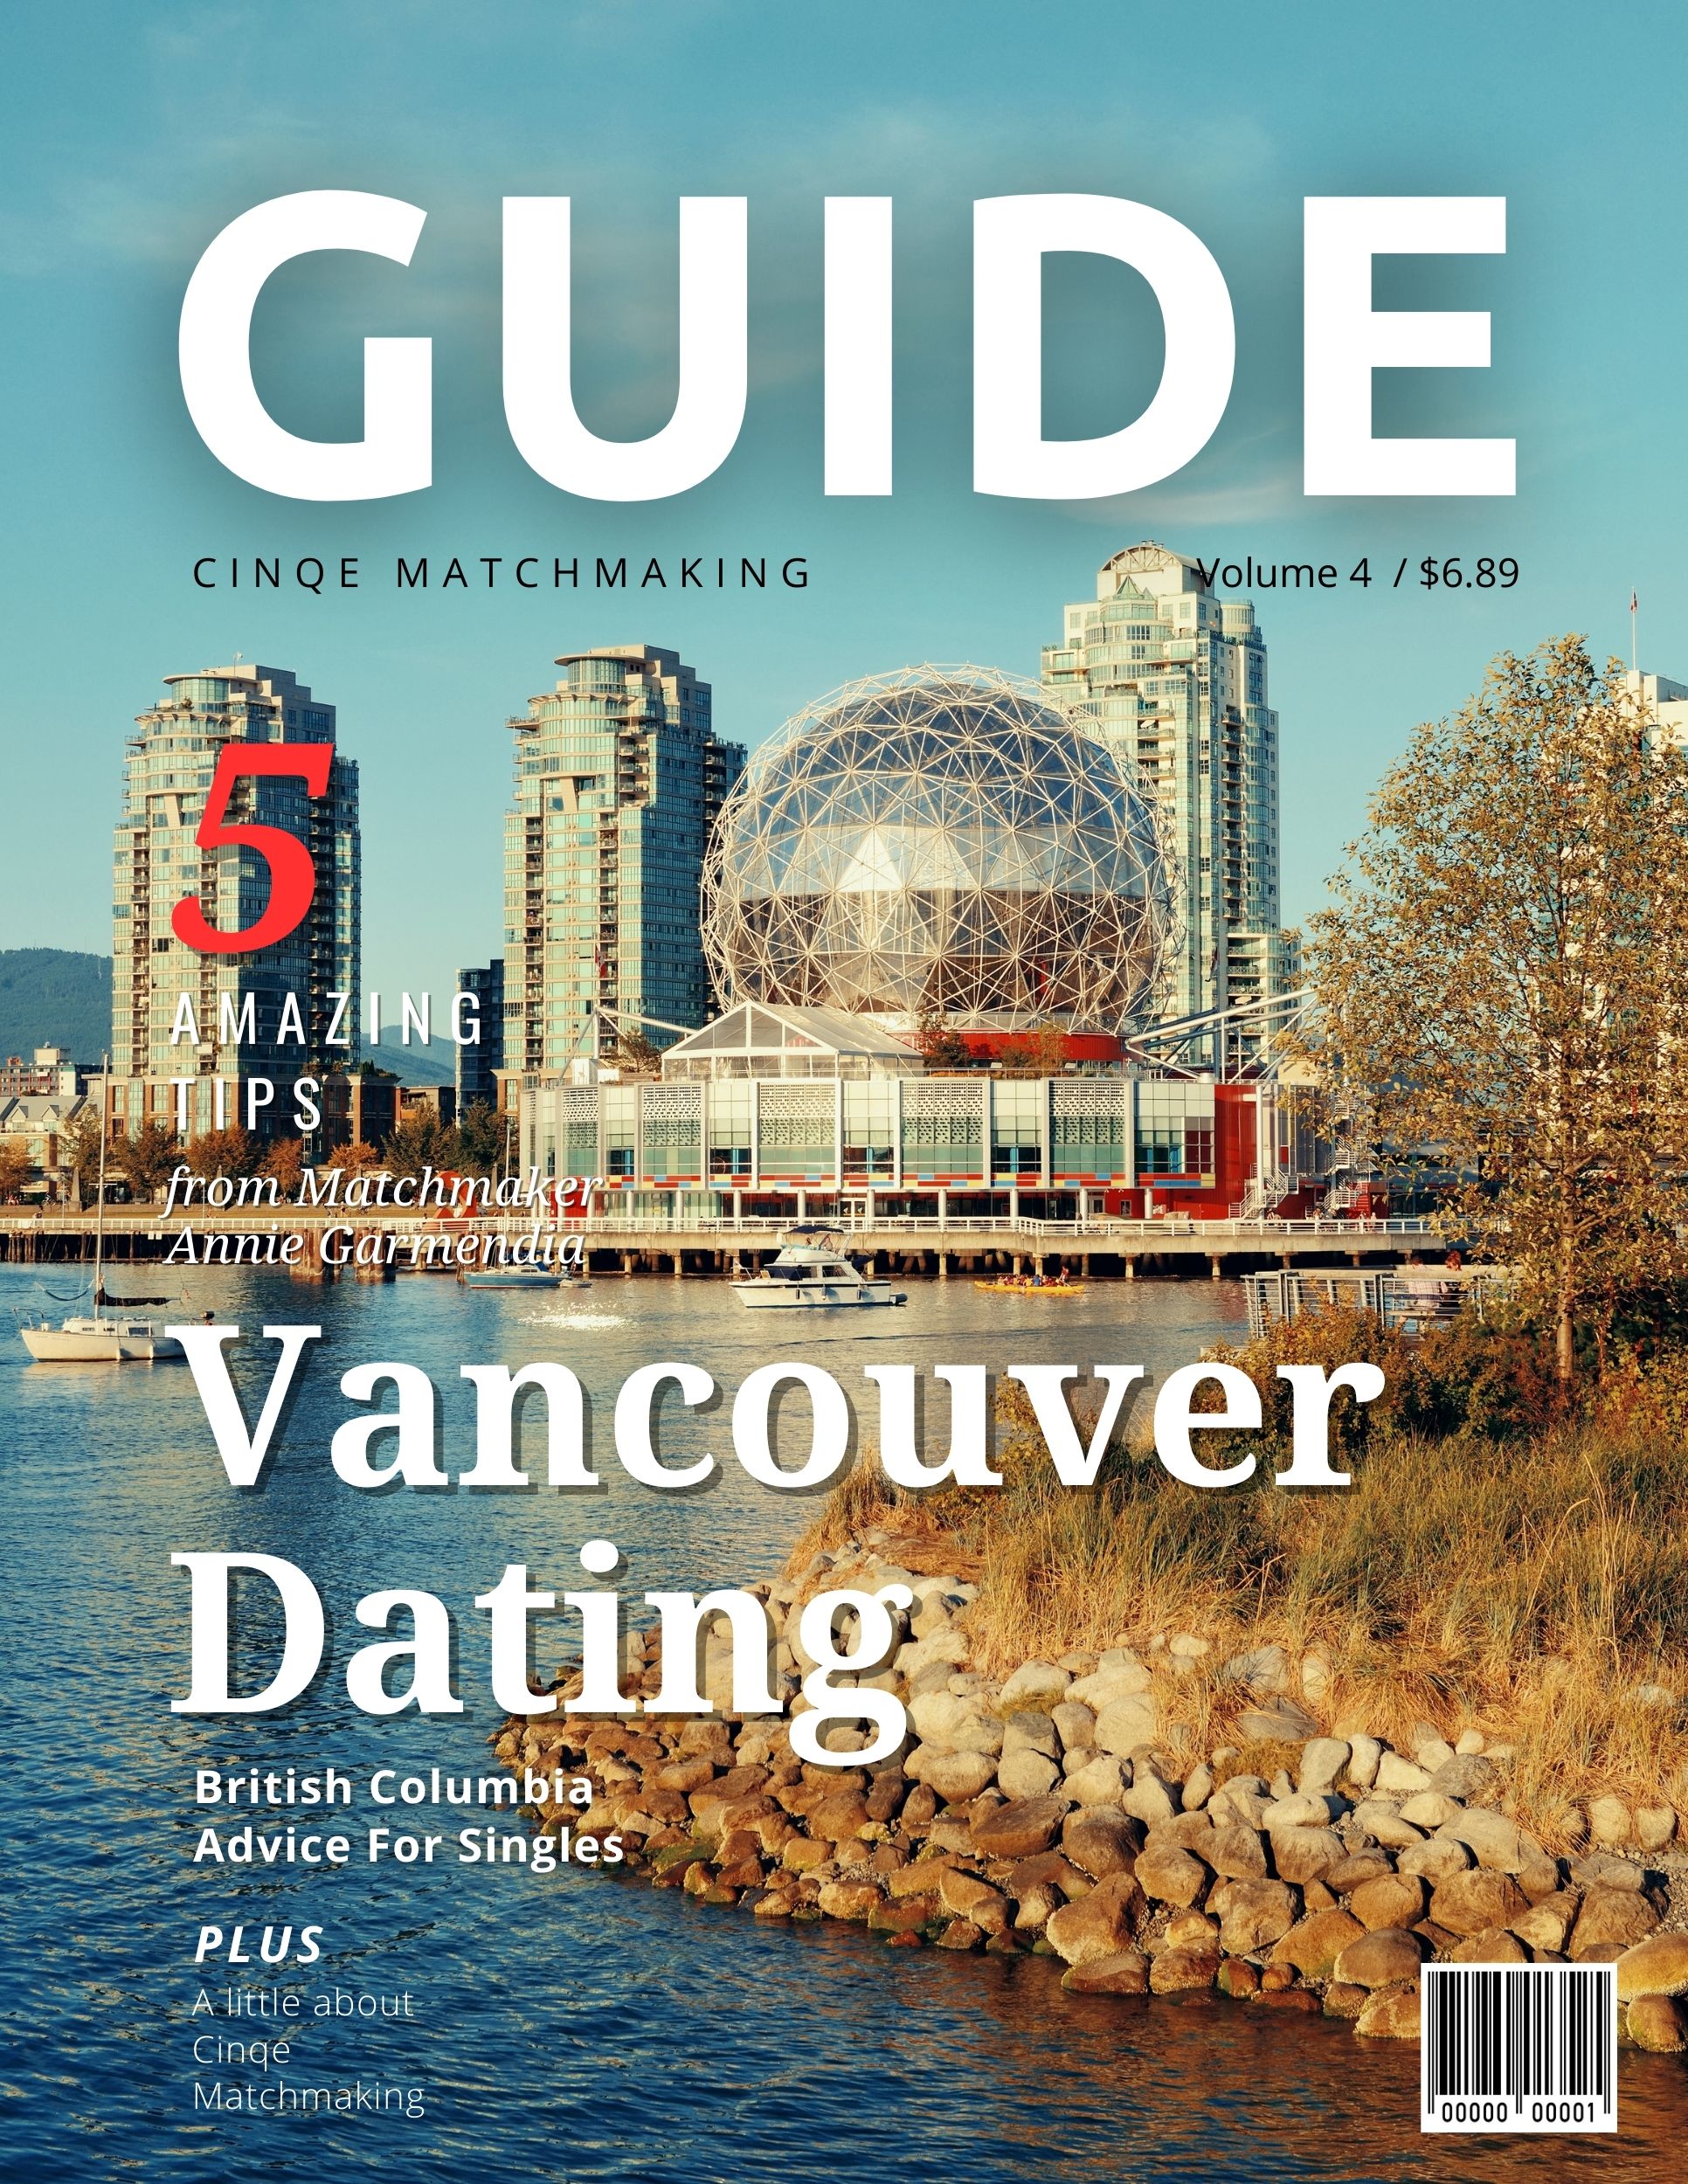 Vancouver BC dating guide book magazine